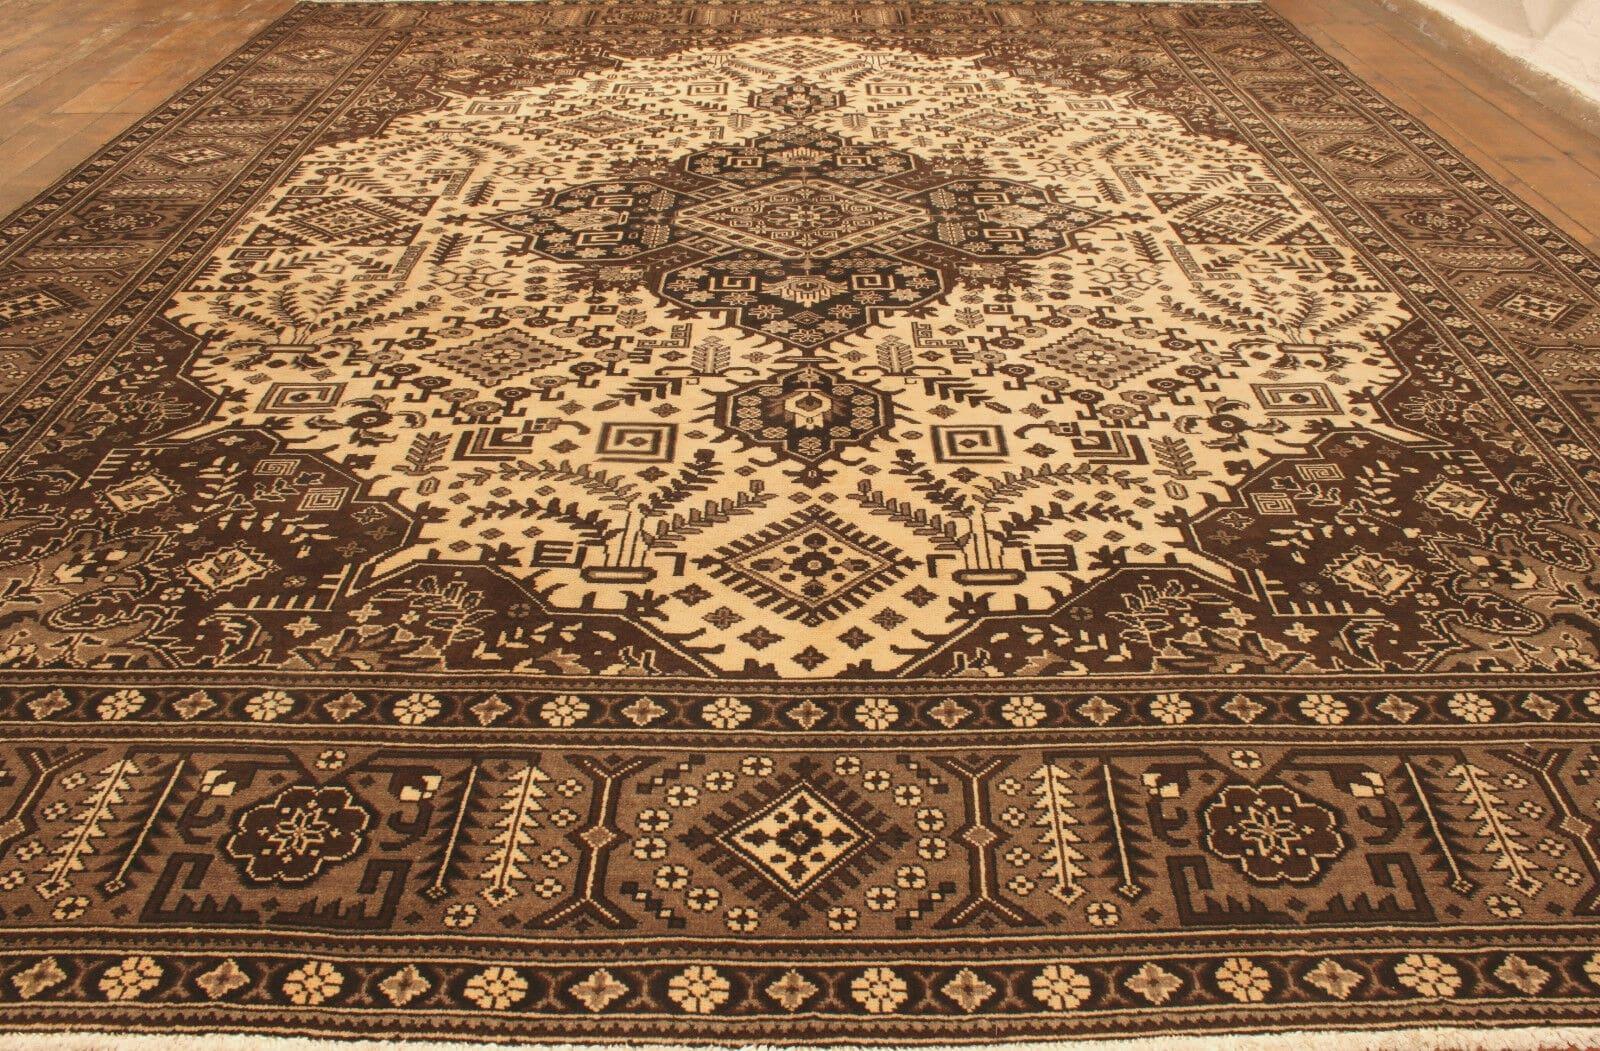 Wool Handmade Vintage Persian Style Tabriz Rug 10' x 12.8', 1970s - 1T40 For Sale